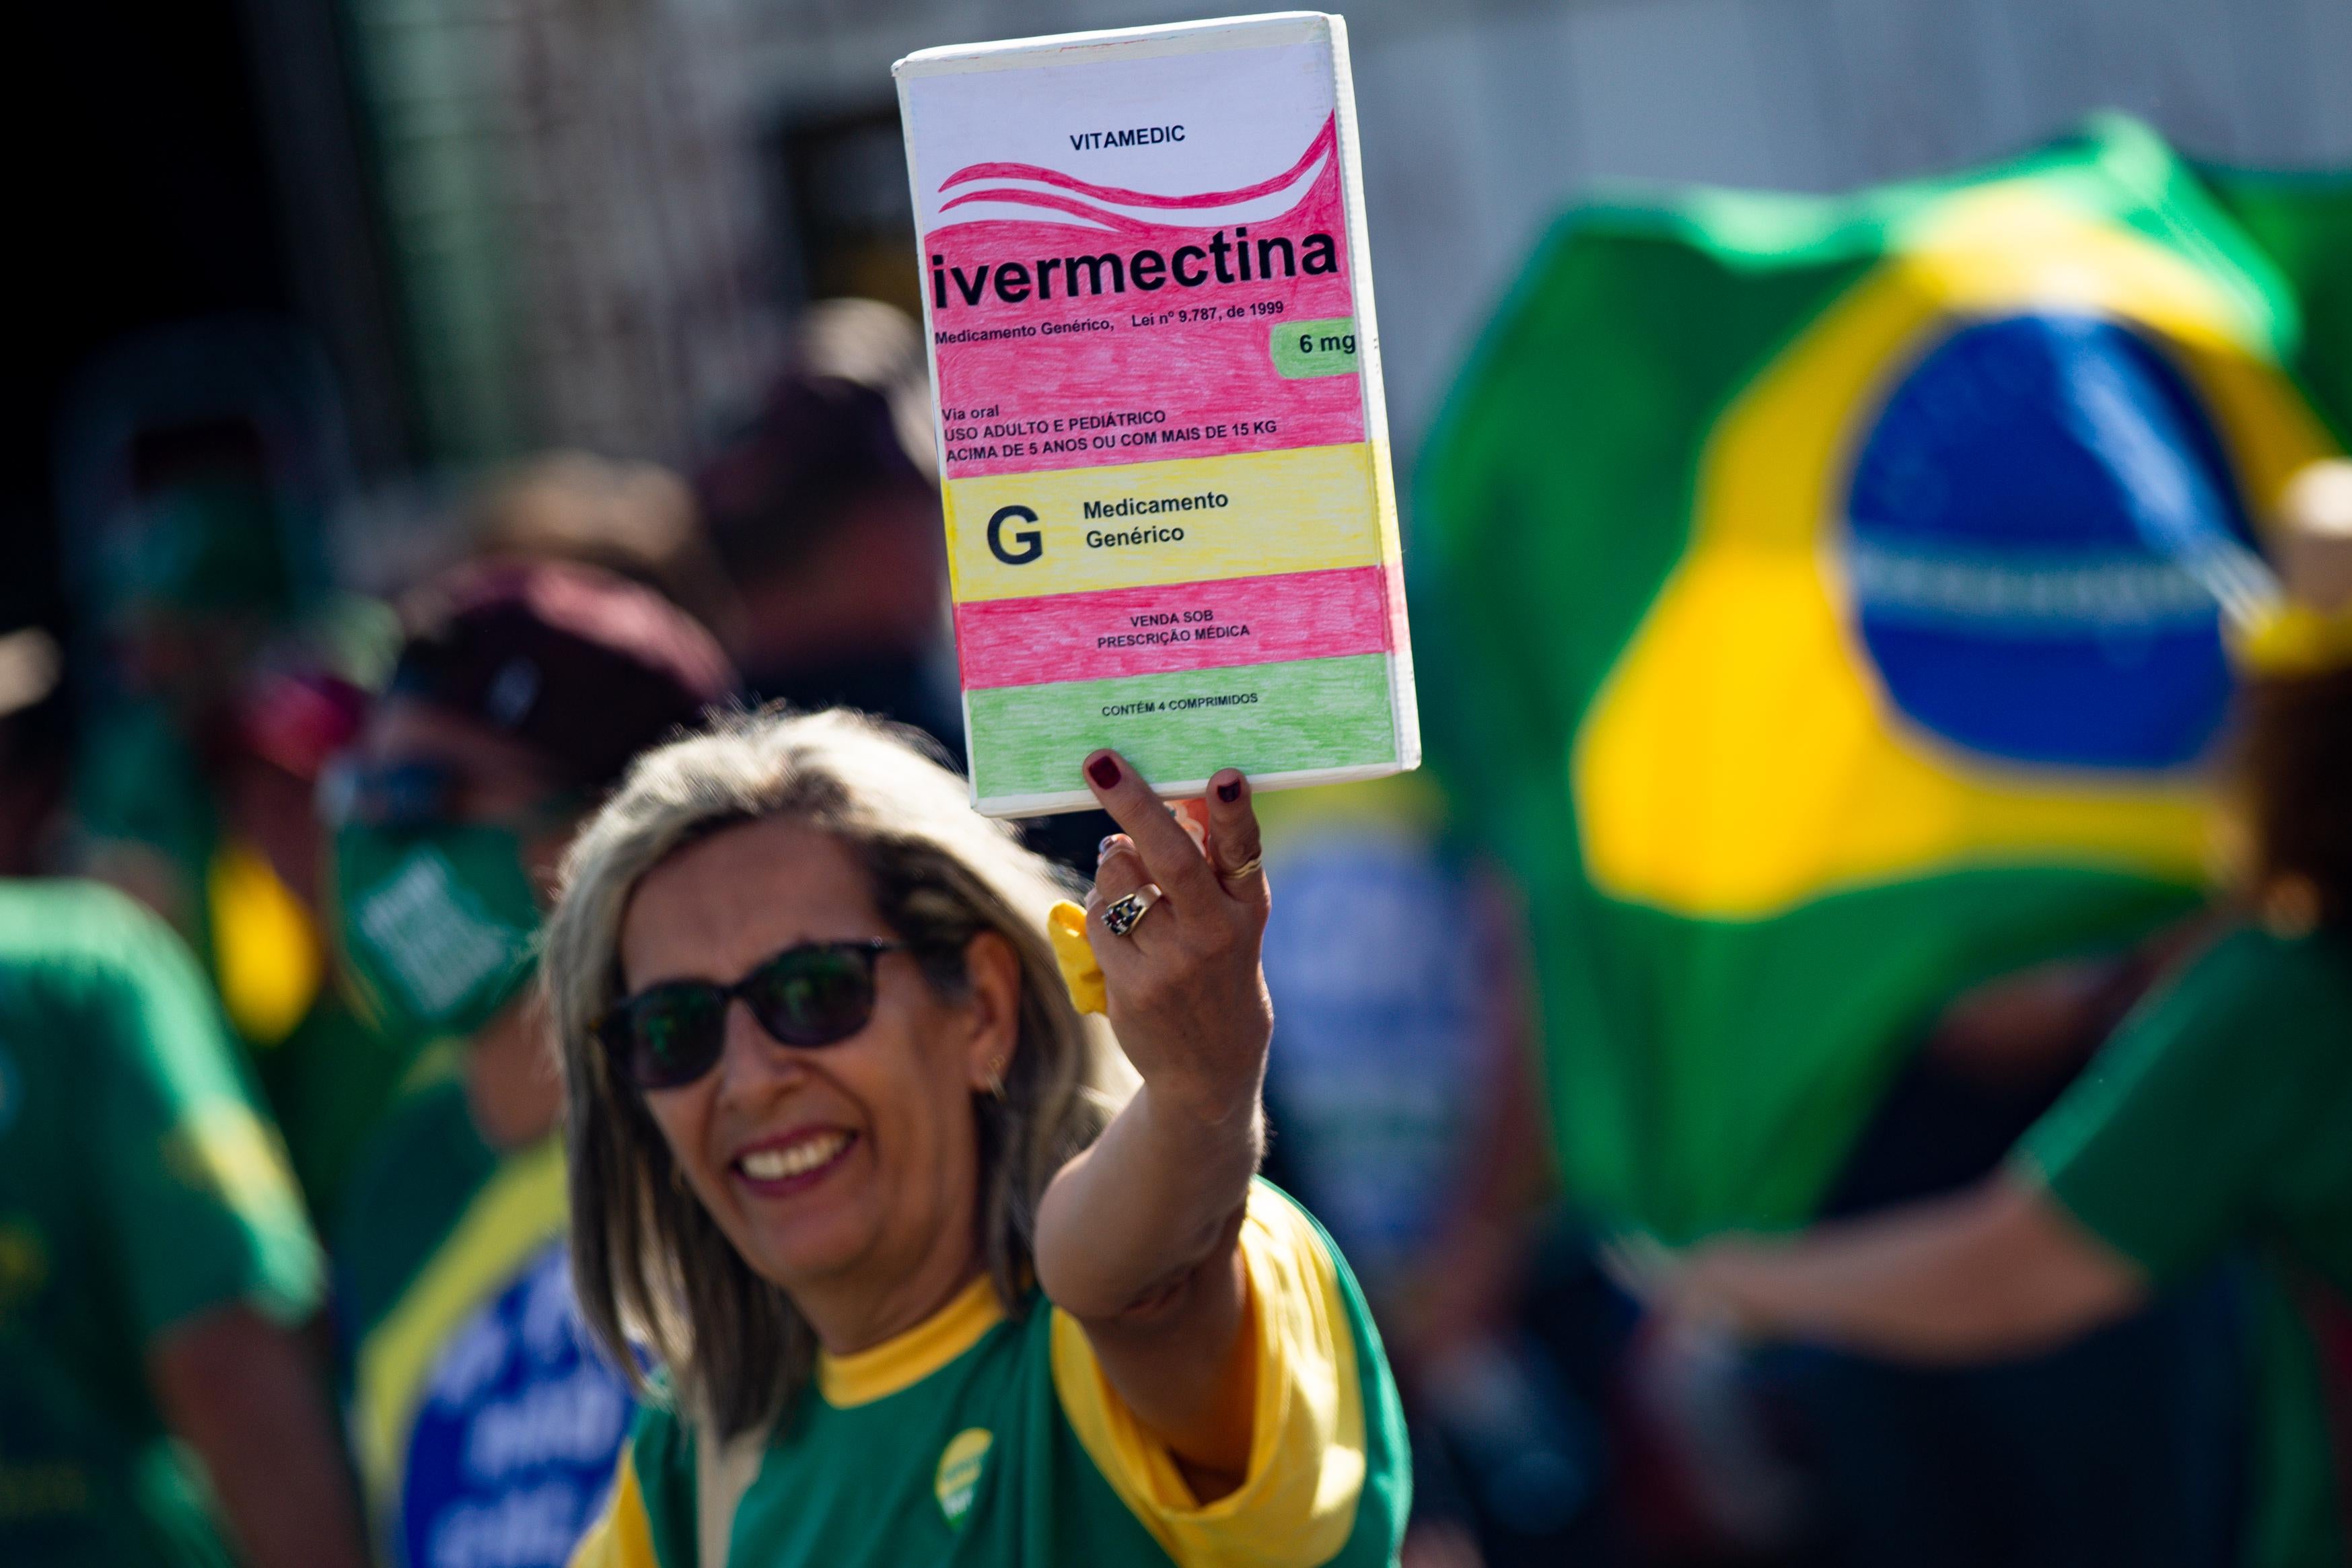 A woman holds a large box of box of ivermectin while someone behind her unfurls a Brazilian flag.